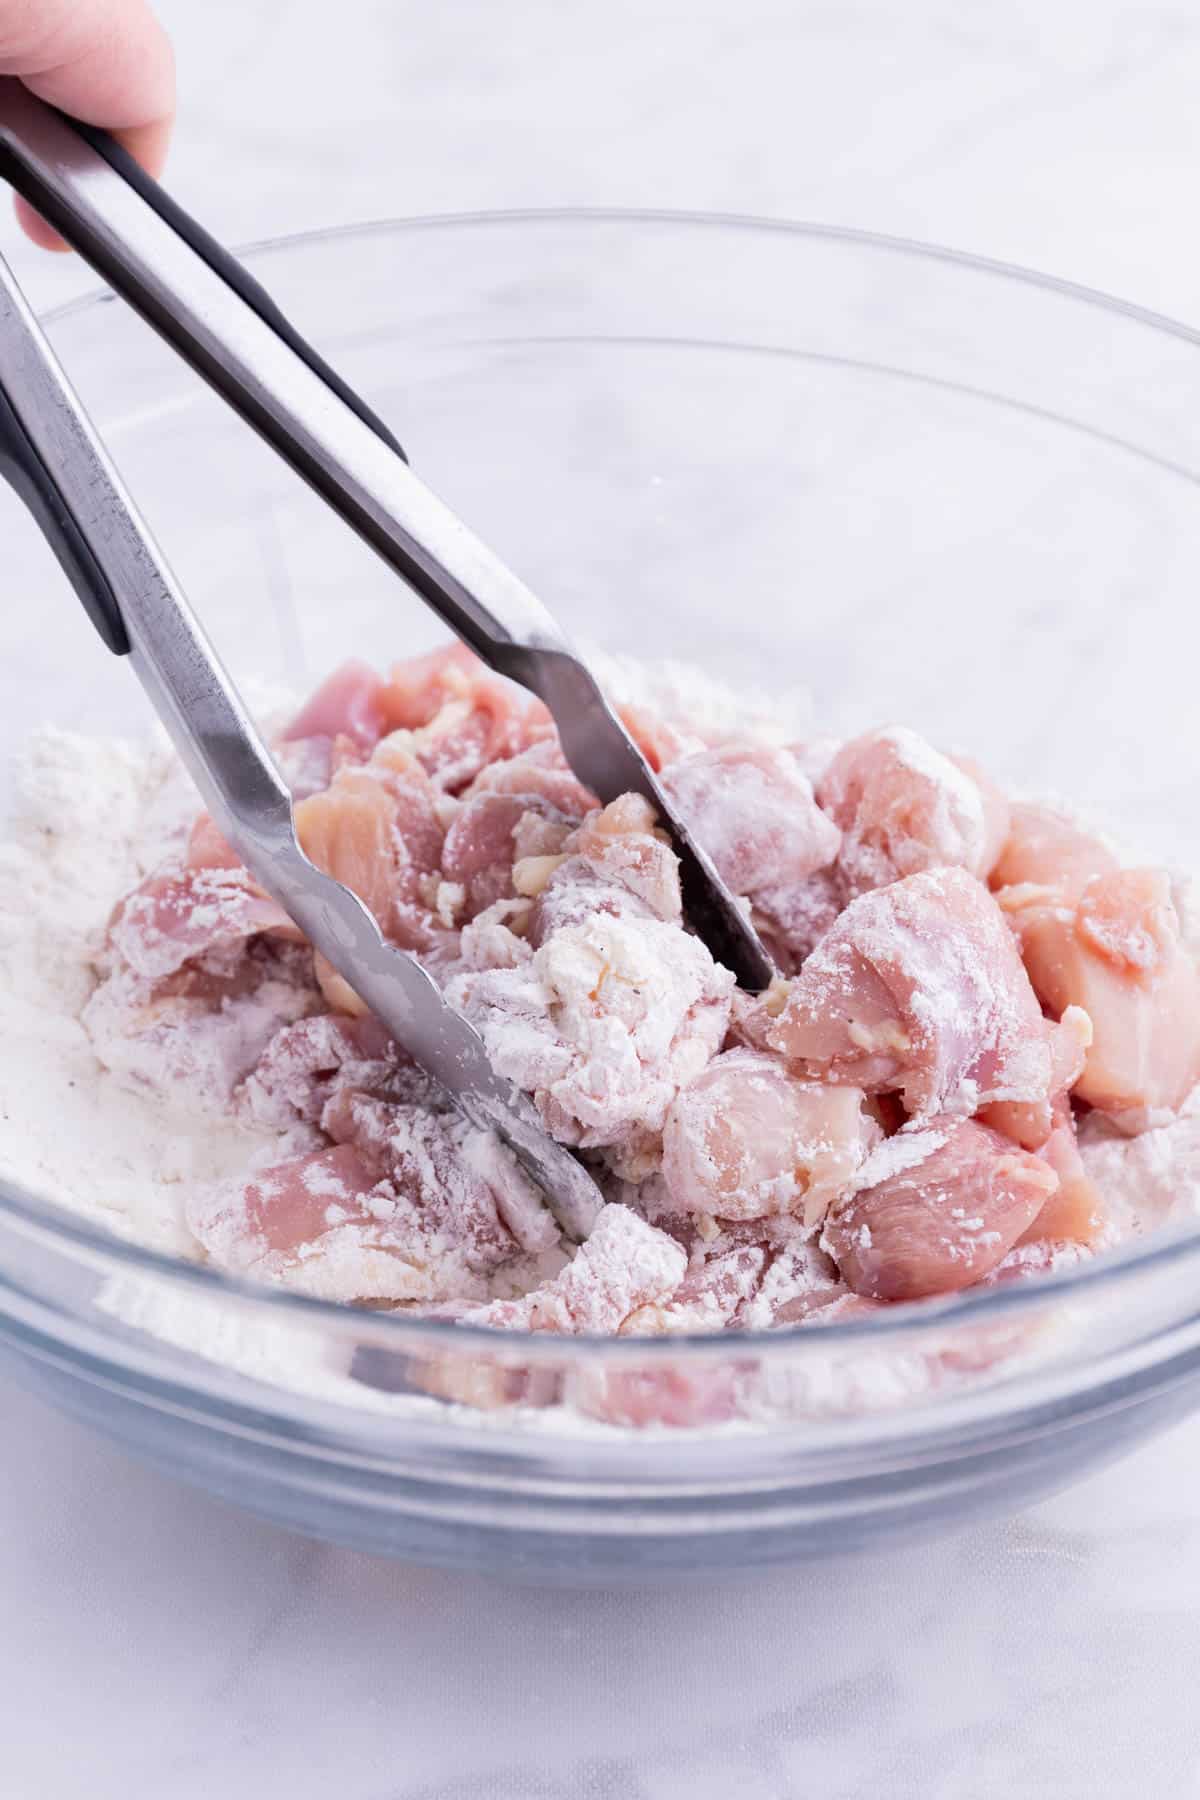 Chicken pieces are coated in the flour mixture.